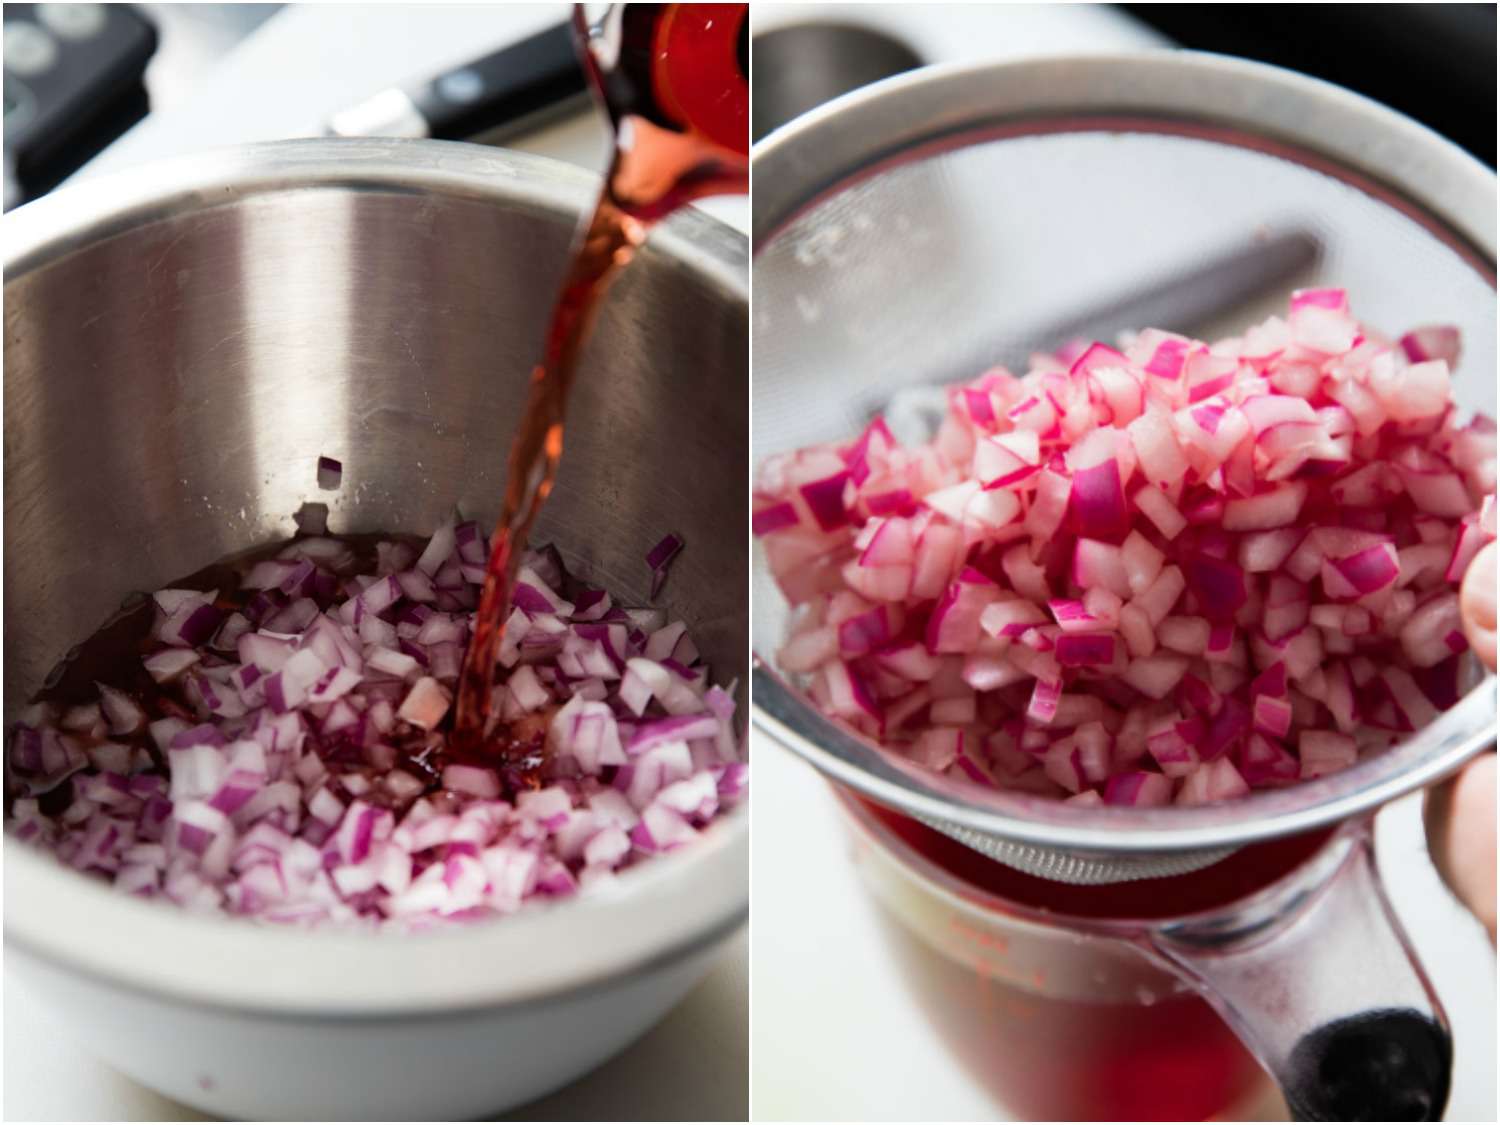 Collage of vinegar being poured on diced onion and then drained after pickling.